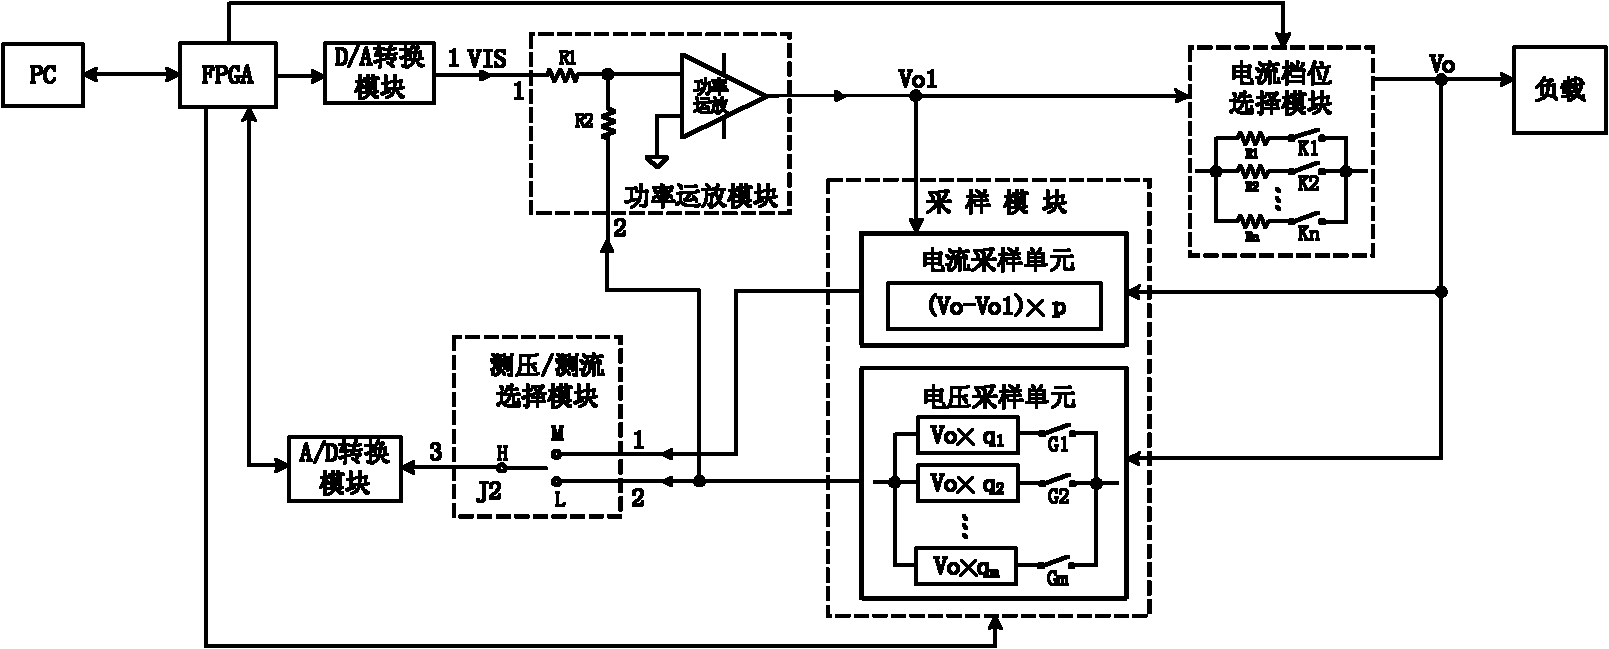 Numerical-control direct-current power source